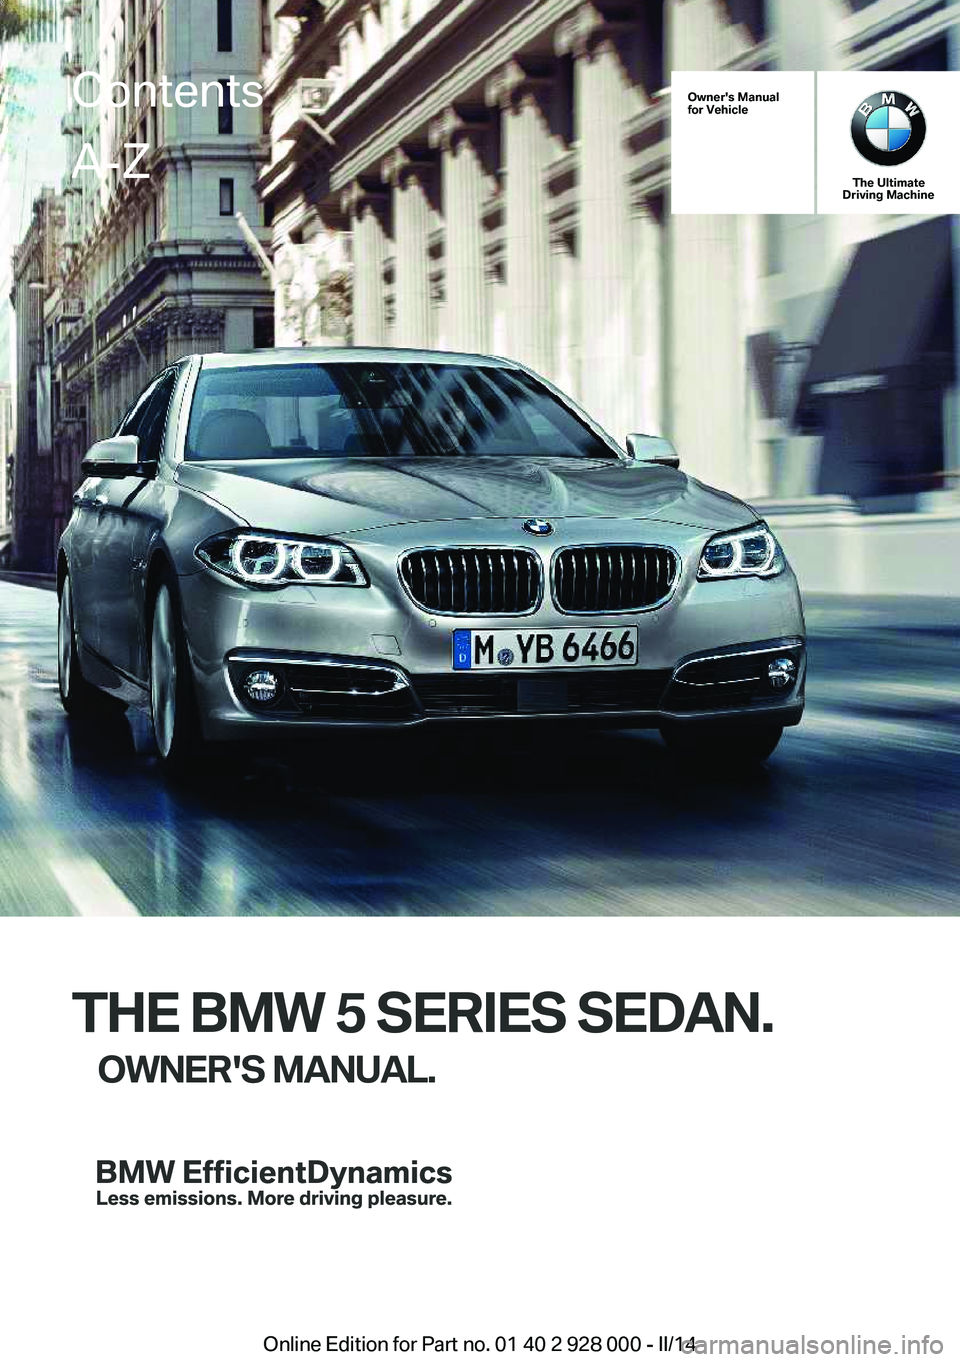 BMW 535D SEDAN 2014  Owners Manual Owner's Manual
for Vehicle
The Ultimate
Driving Machine
THE BMW 5 SERIES SEDAN.
OWNER'S MANUAL.
ContentsA-Z
Online Edition for Part no. 01 40 2 928 000 - II/14   